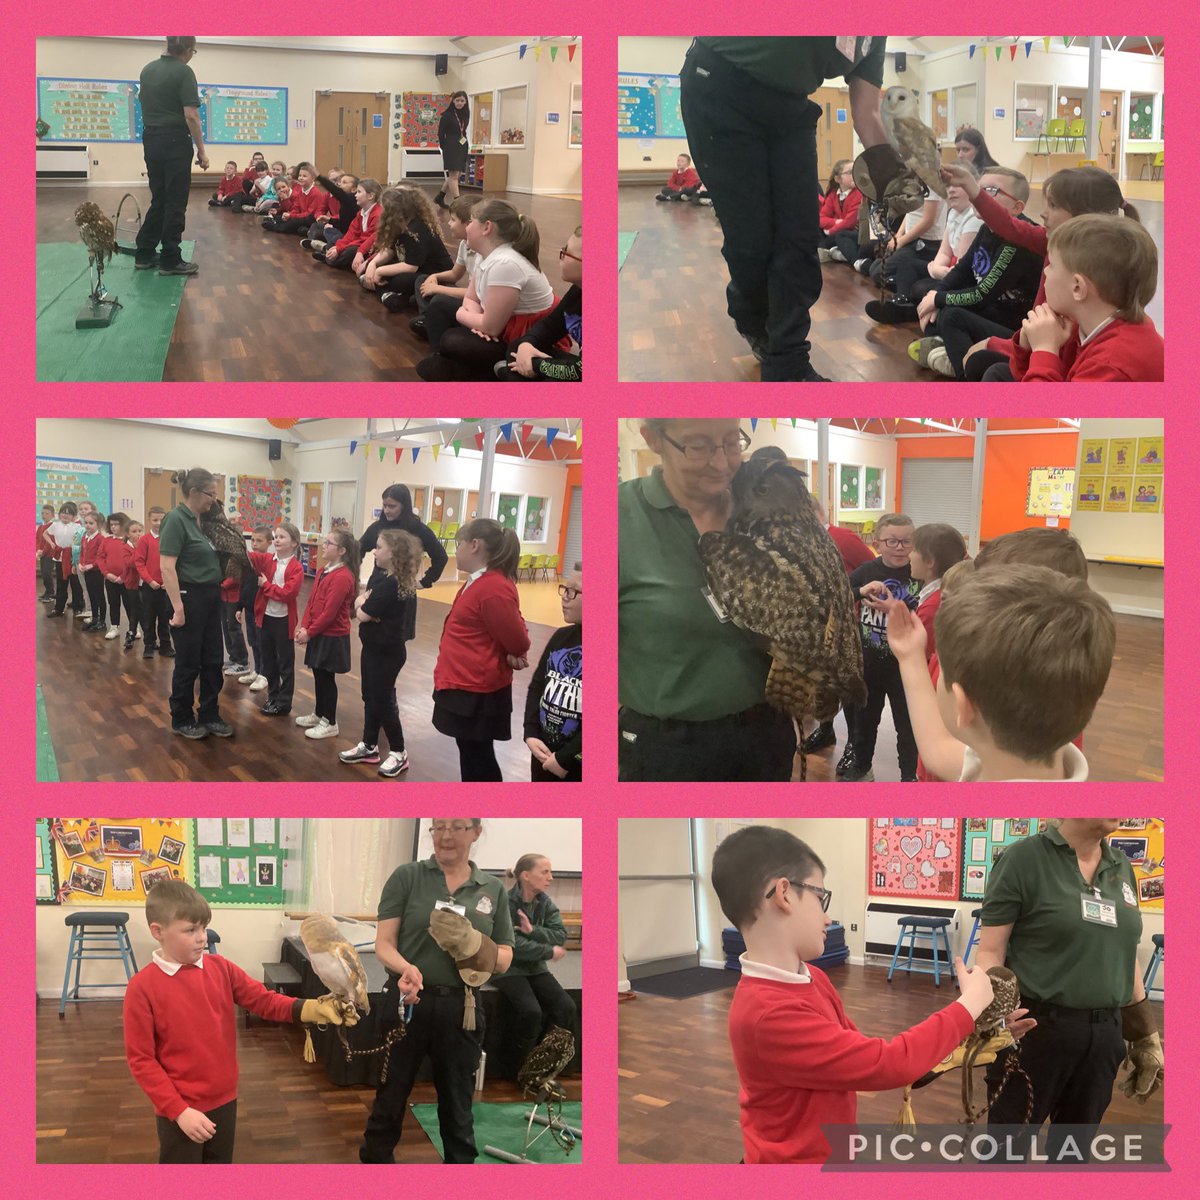 Year 3 Dragonflies had an amazing visit from @EbbwSanctuary. We meet some amazing owls and even got to learn some fascinating facts!